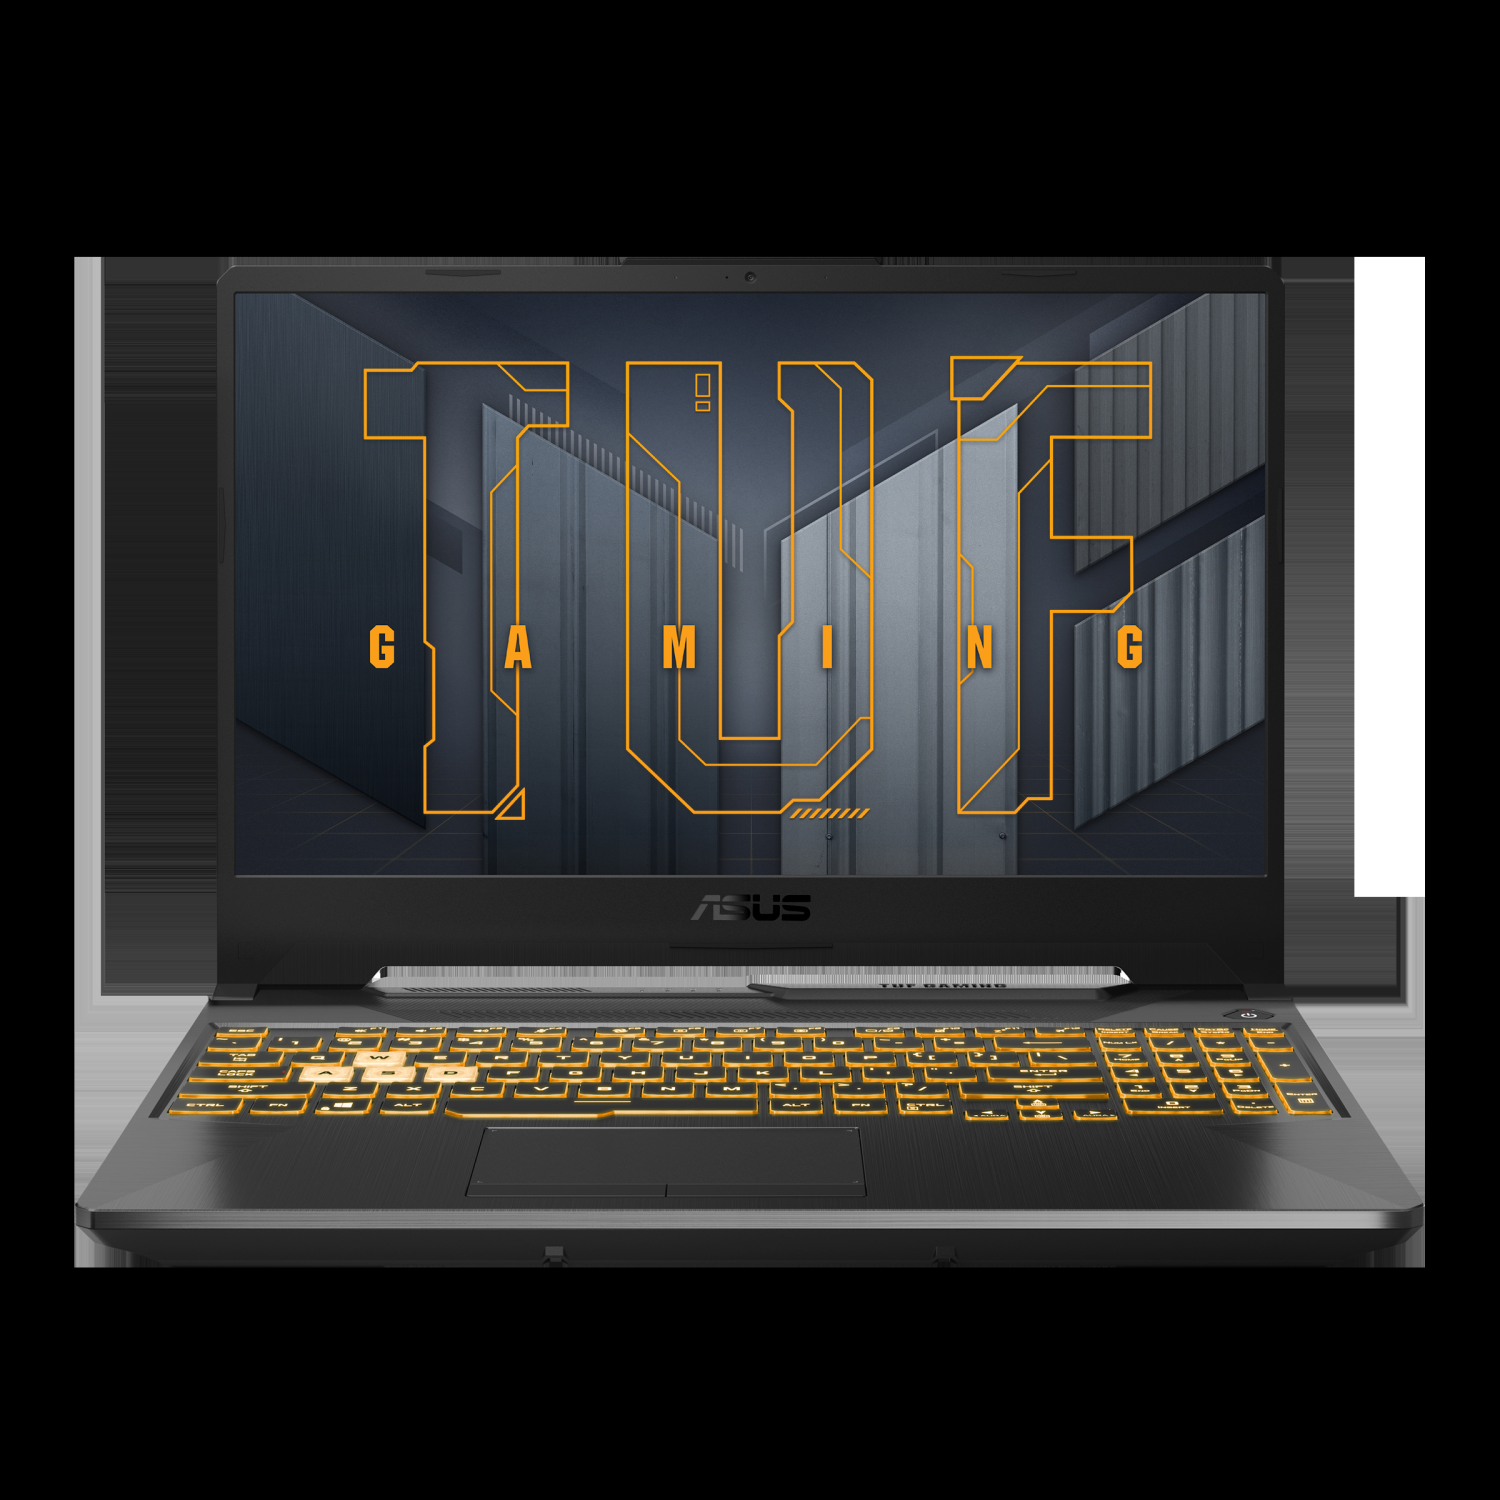 NEW - ASUS TUF Gaming F15 15.6" Gaming Laptop, Intel Core i5-11400H, 8GB RAM, 512GB SSD, NVIDIA GeForce RTX 3050 4GB, Windwos 10 Home (Win. 11 Ready)